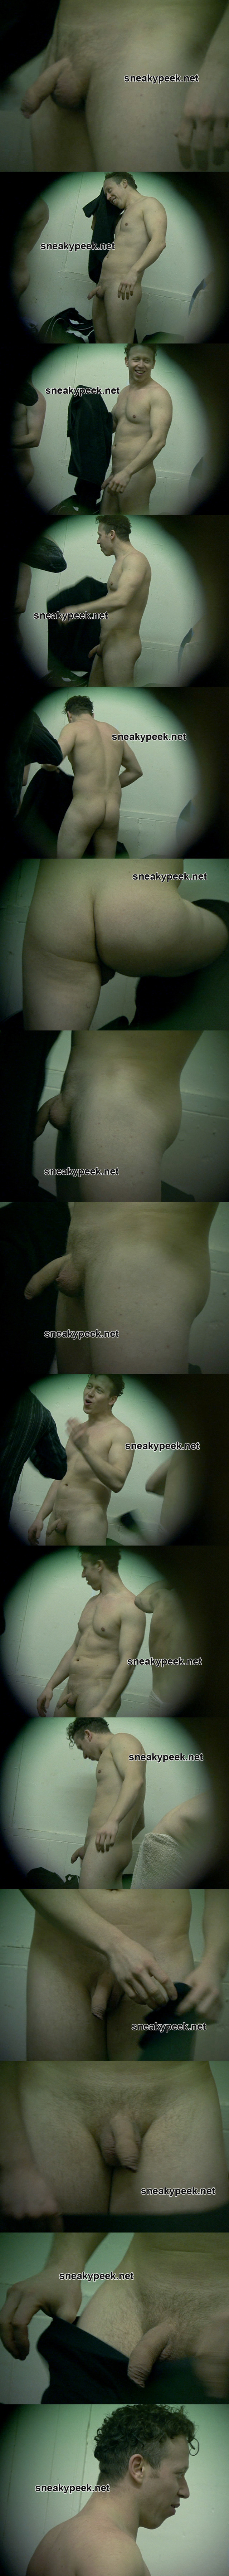 uncut-guy-caught-naked-changing-room-spy-cam